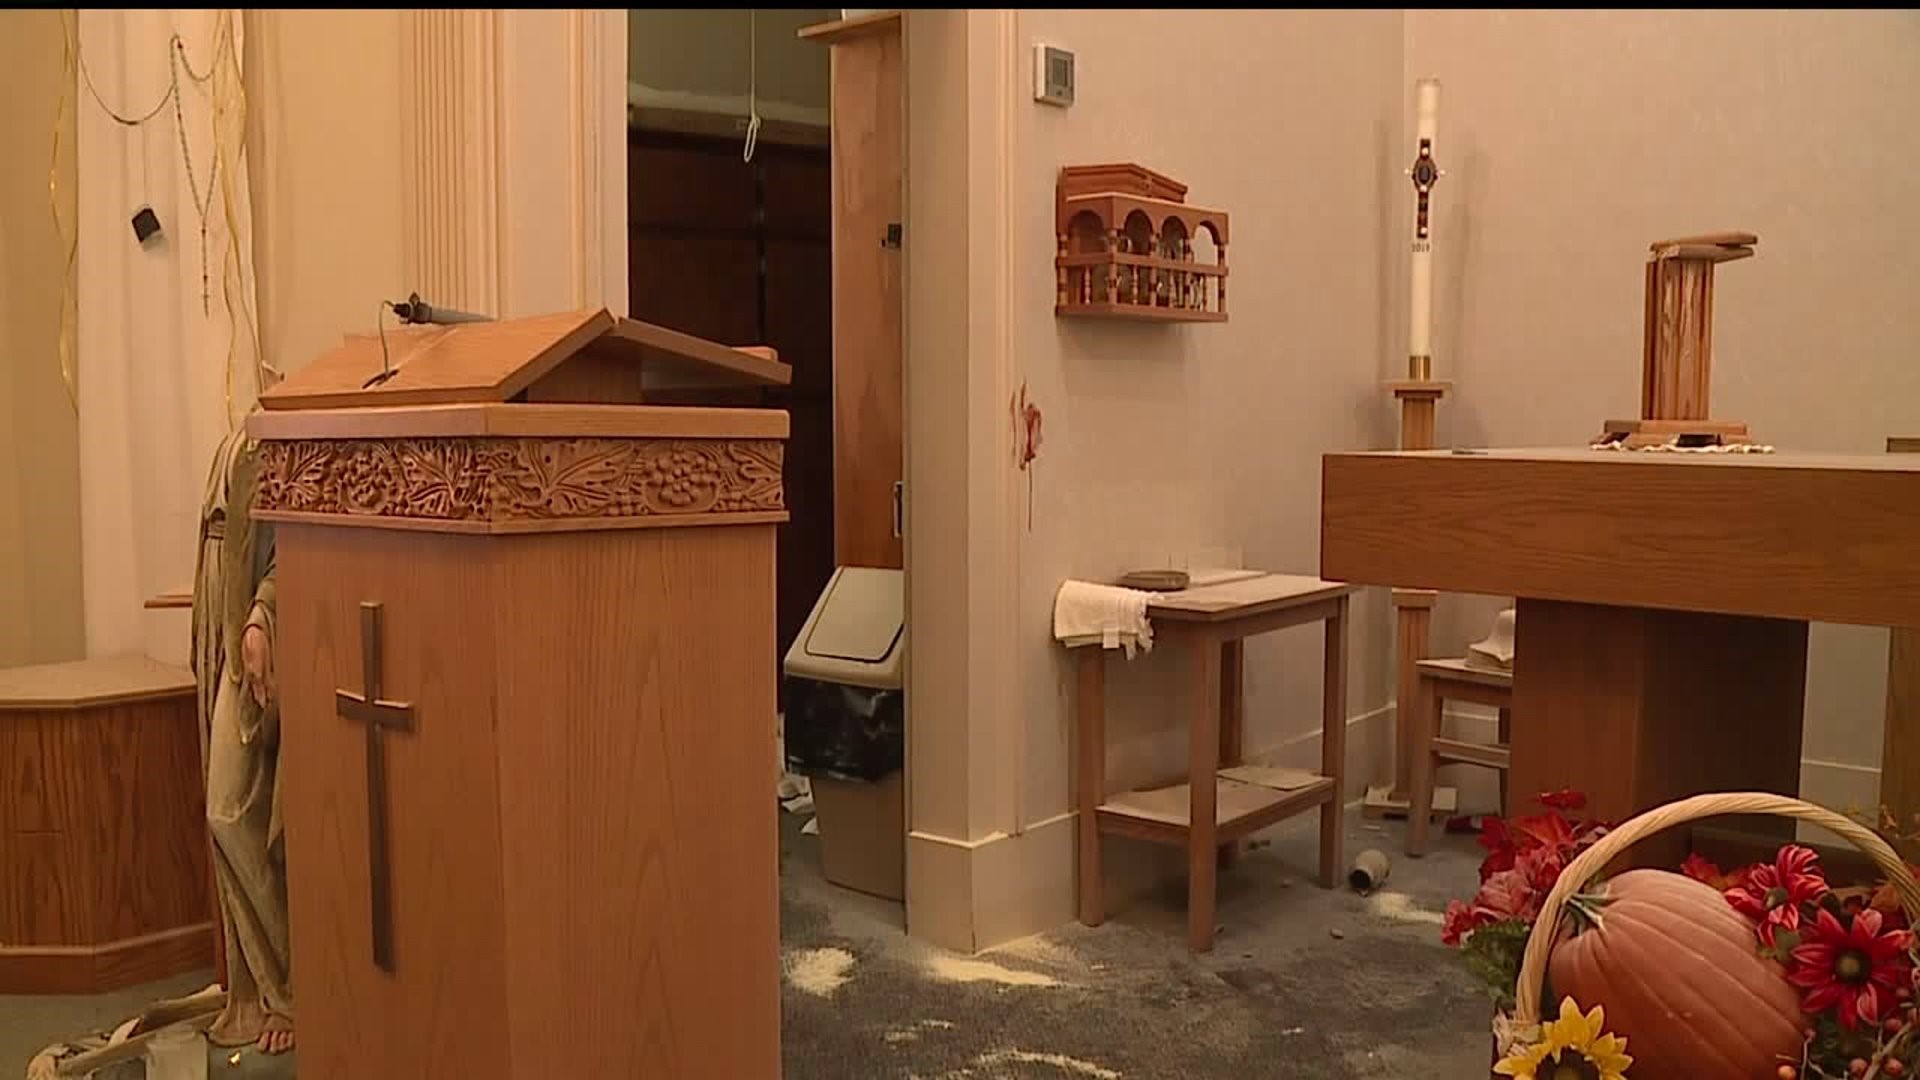 Two Buffalo churches hit by vandals Saturday night, suspects unknown